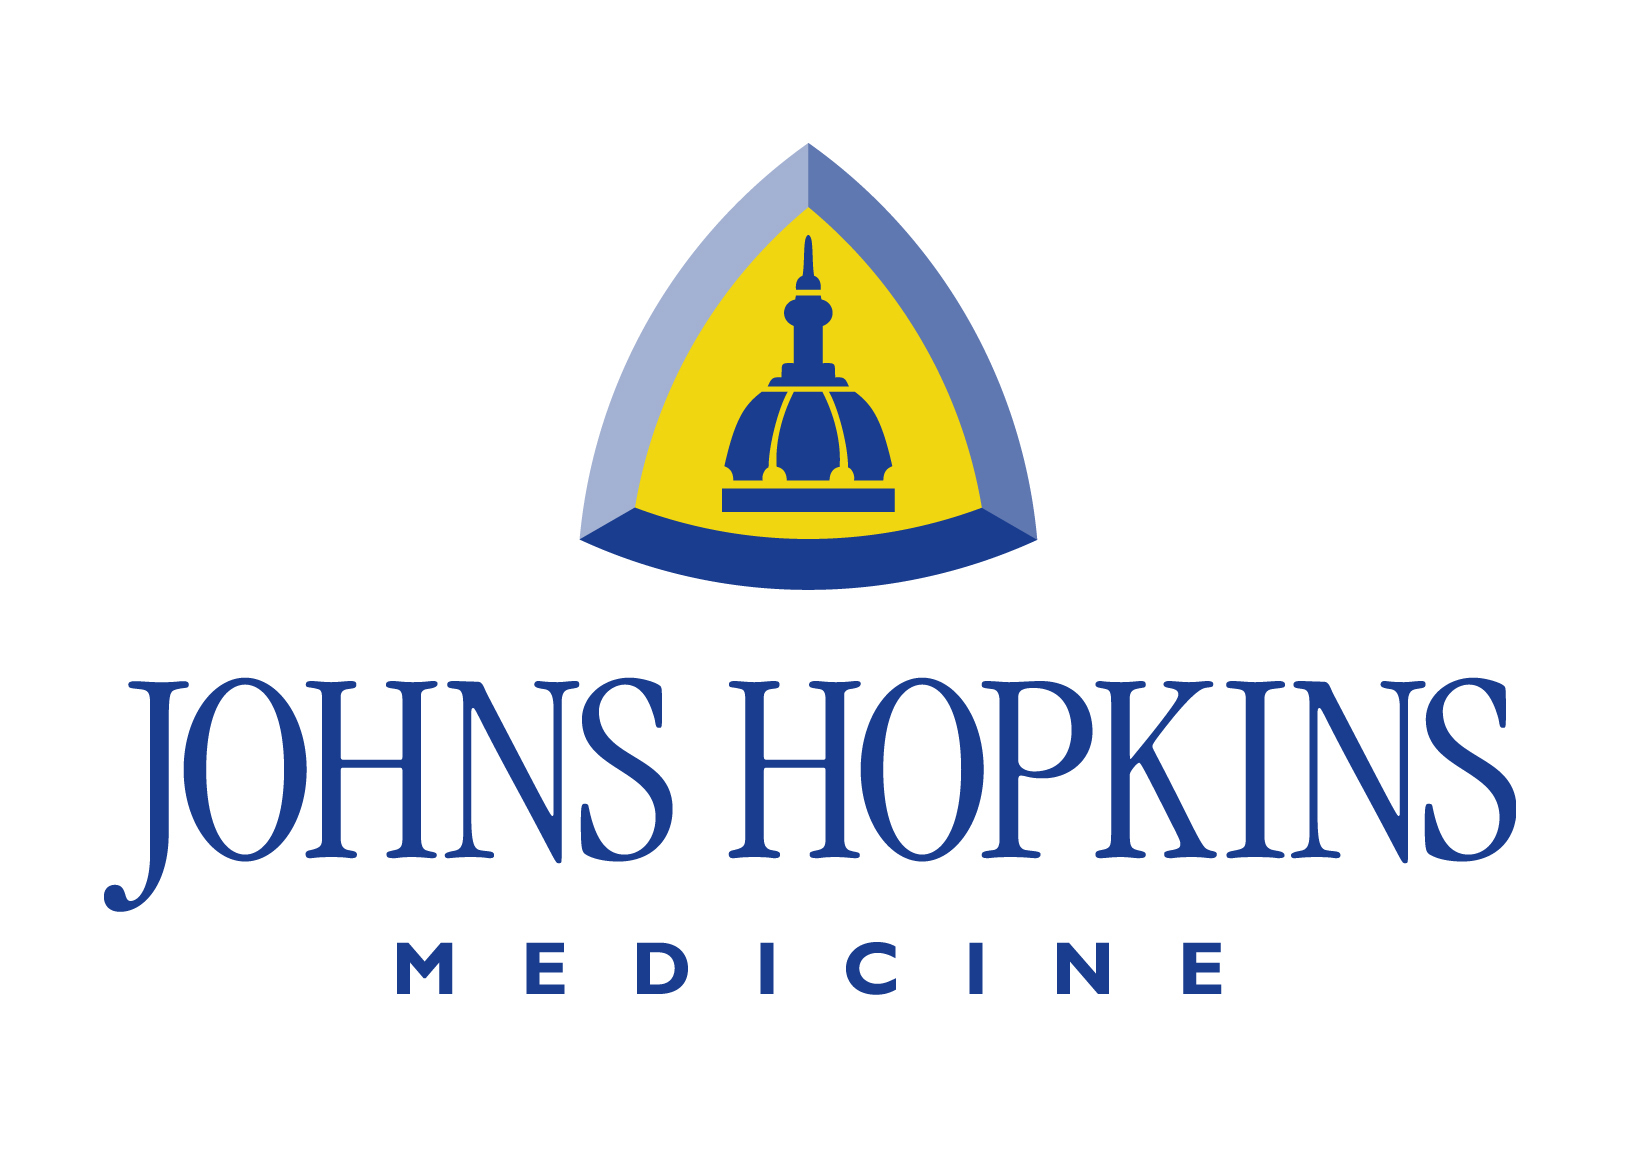 Learn more about Johns Hopkins!